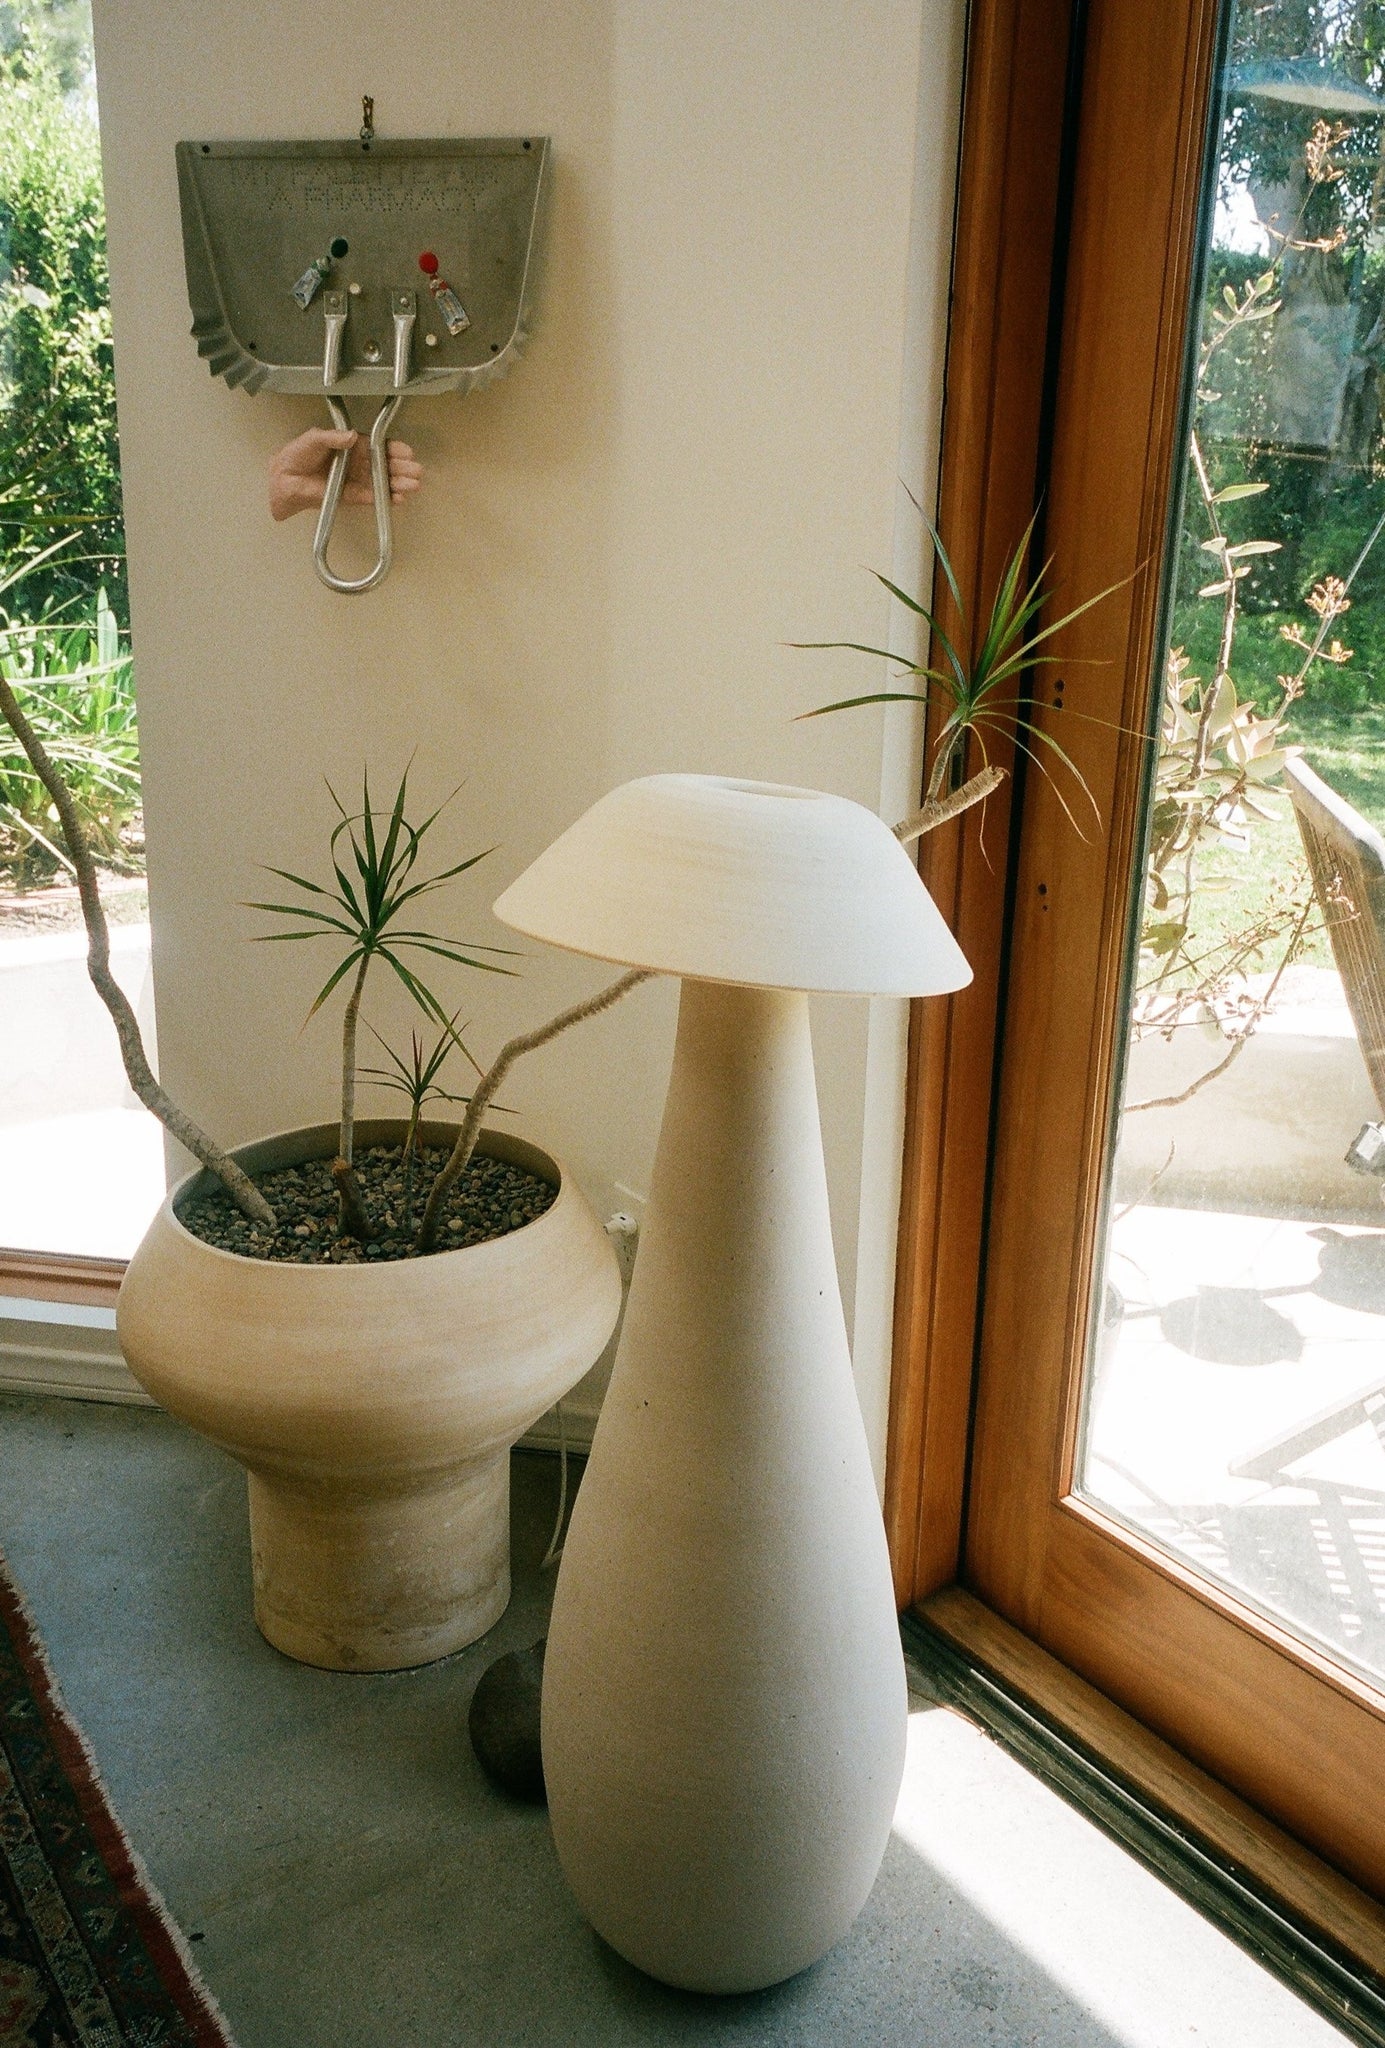 Mushroom Floor Lamp in the corner of a room next to a potted plant.